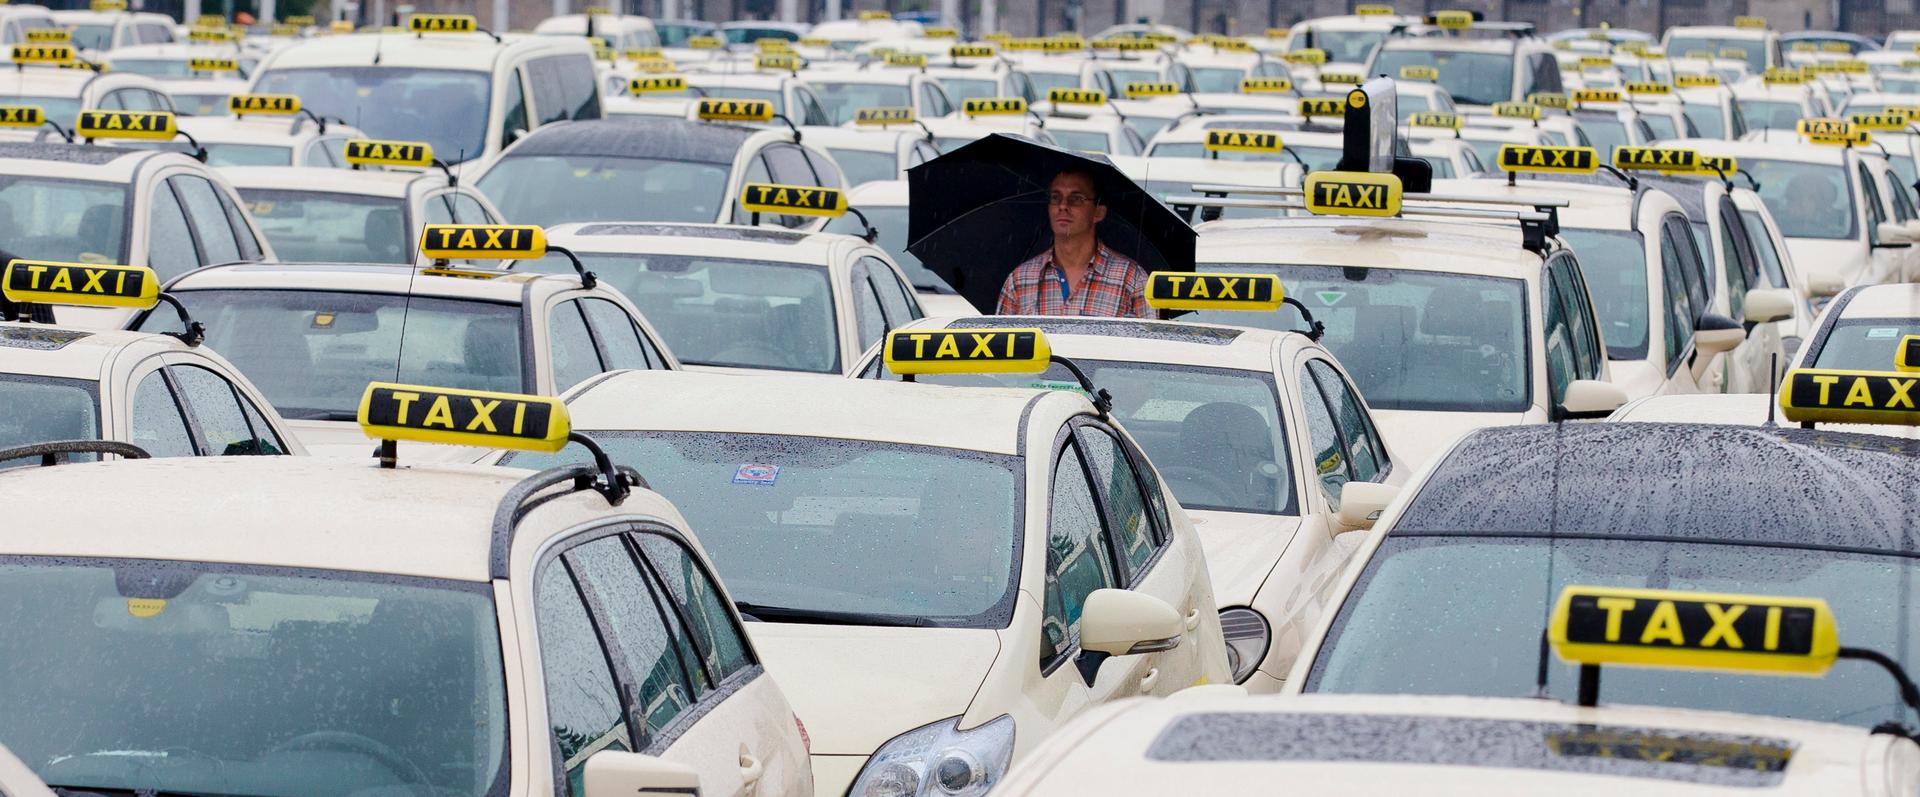 A man attends an Europe-wide protest of licensed taxi drivers against ride hailing apps, like Uber, they fear will allow unregulated, private drivers into the market, in front of the Olympic stadium in Berlin, June 11, 2014.